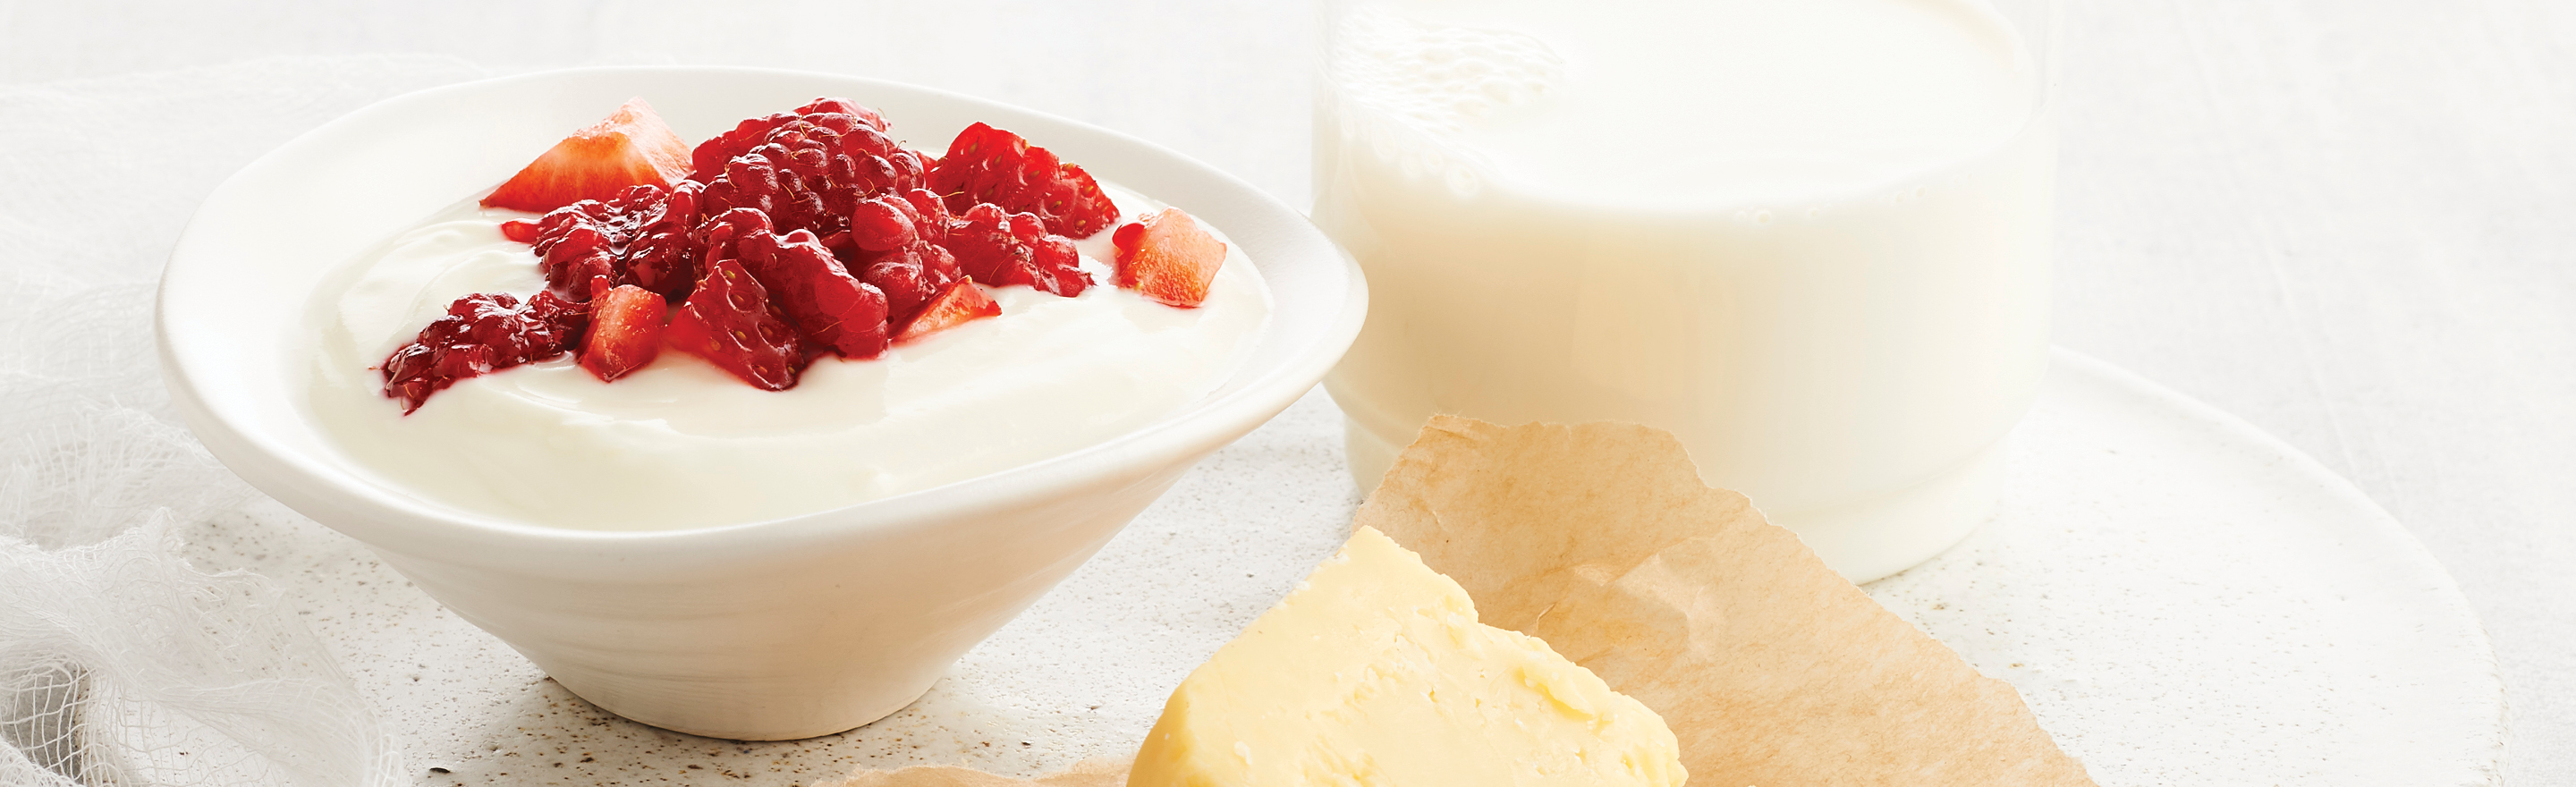 Dairy food group recommendations